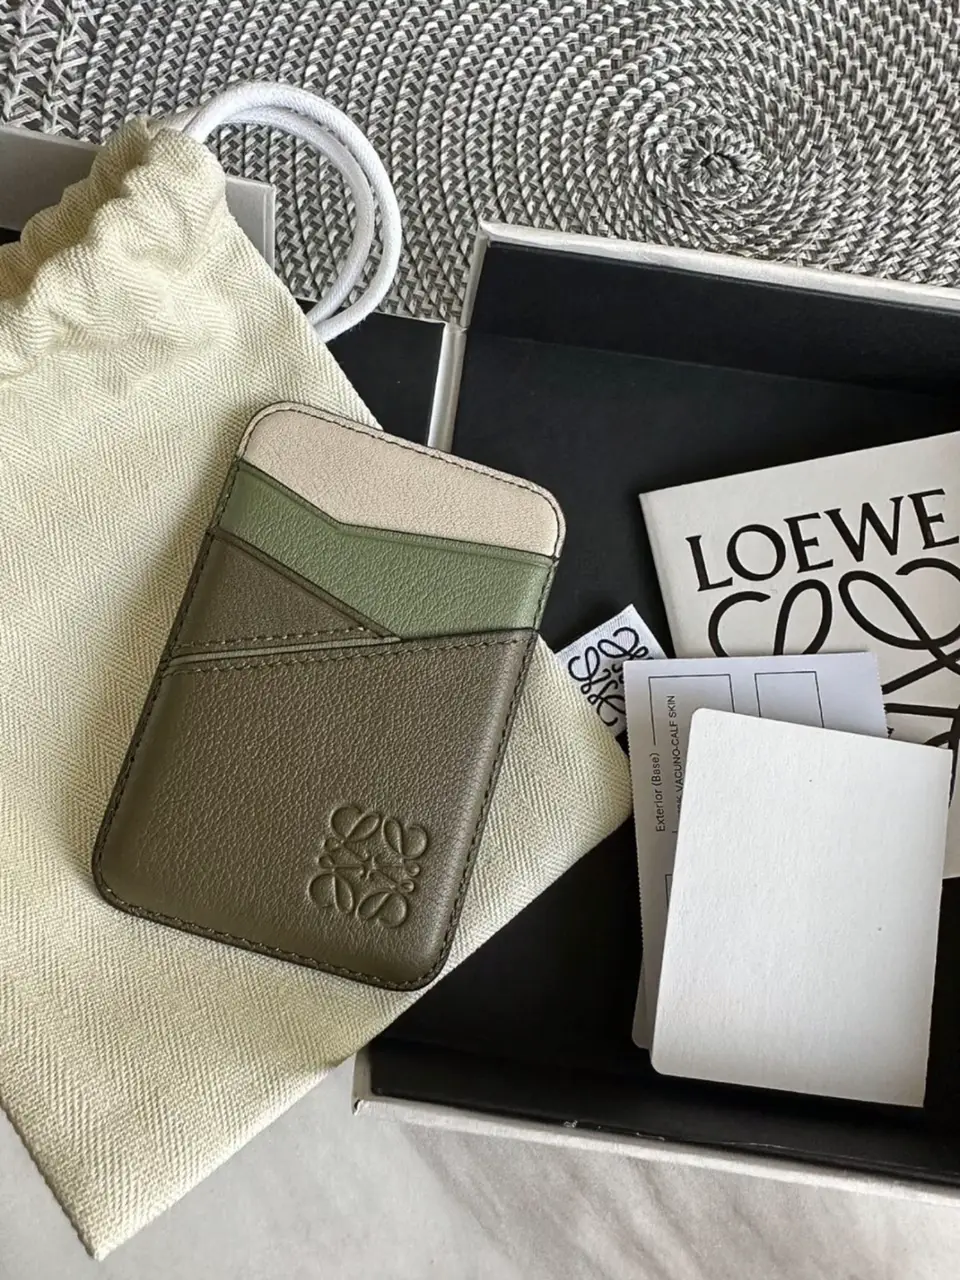 Unboxing and Review Of New Louis Vuitton ID Card Holder Black